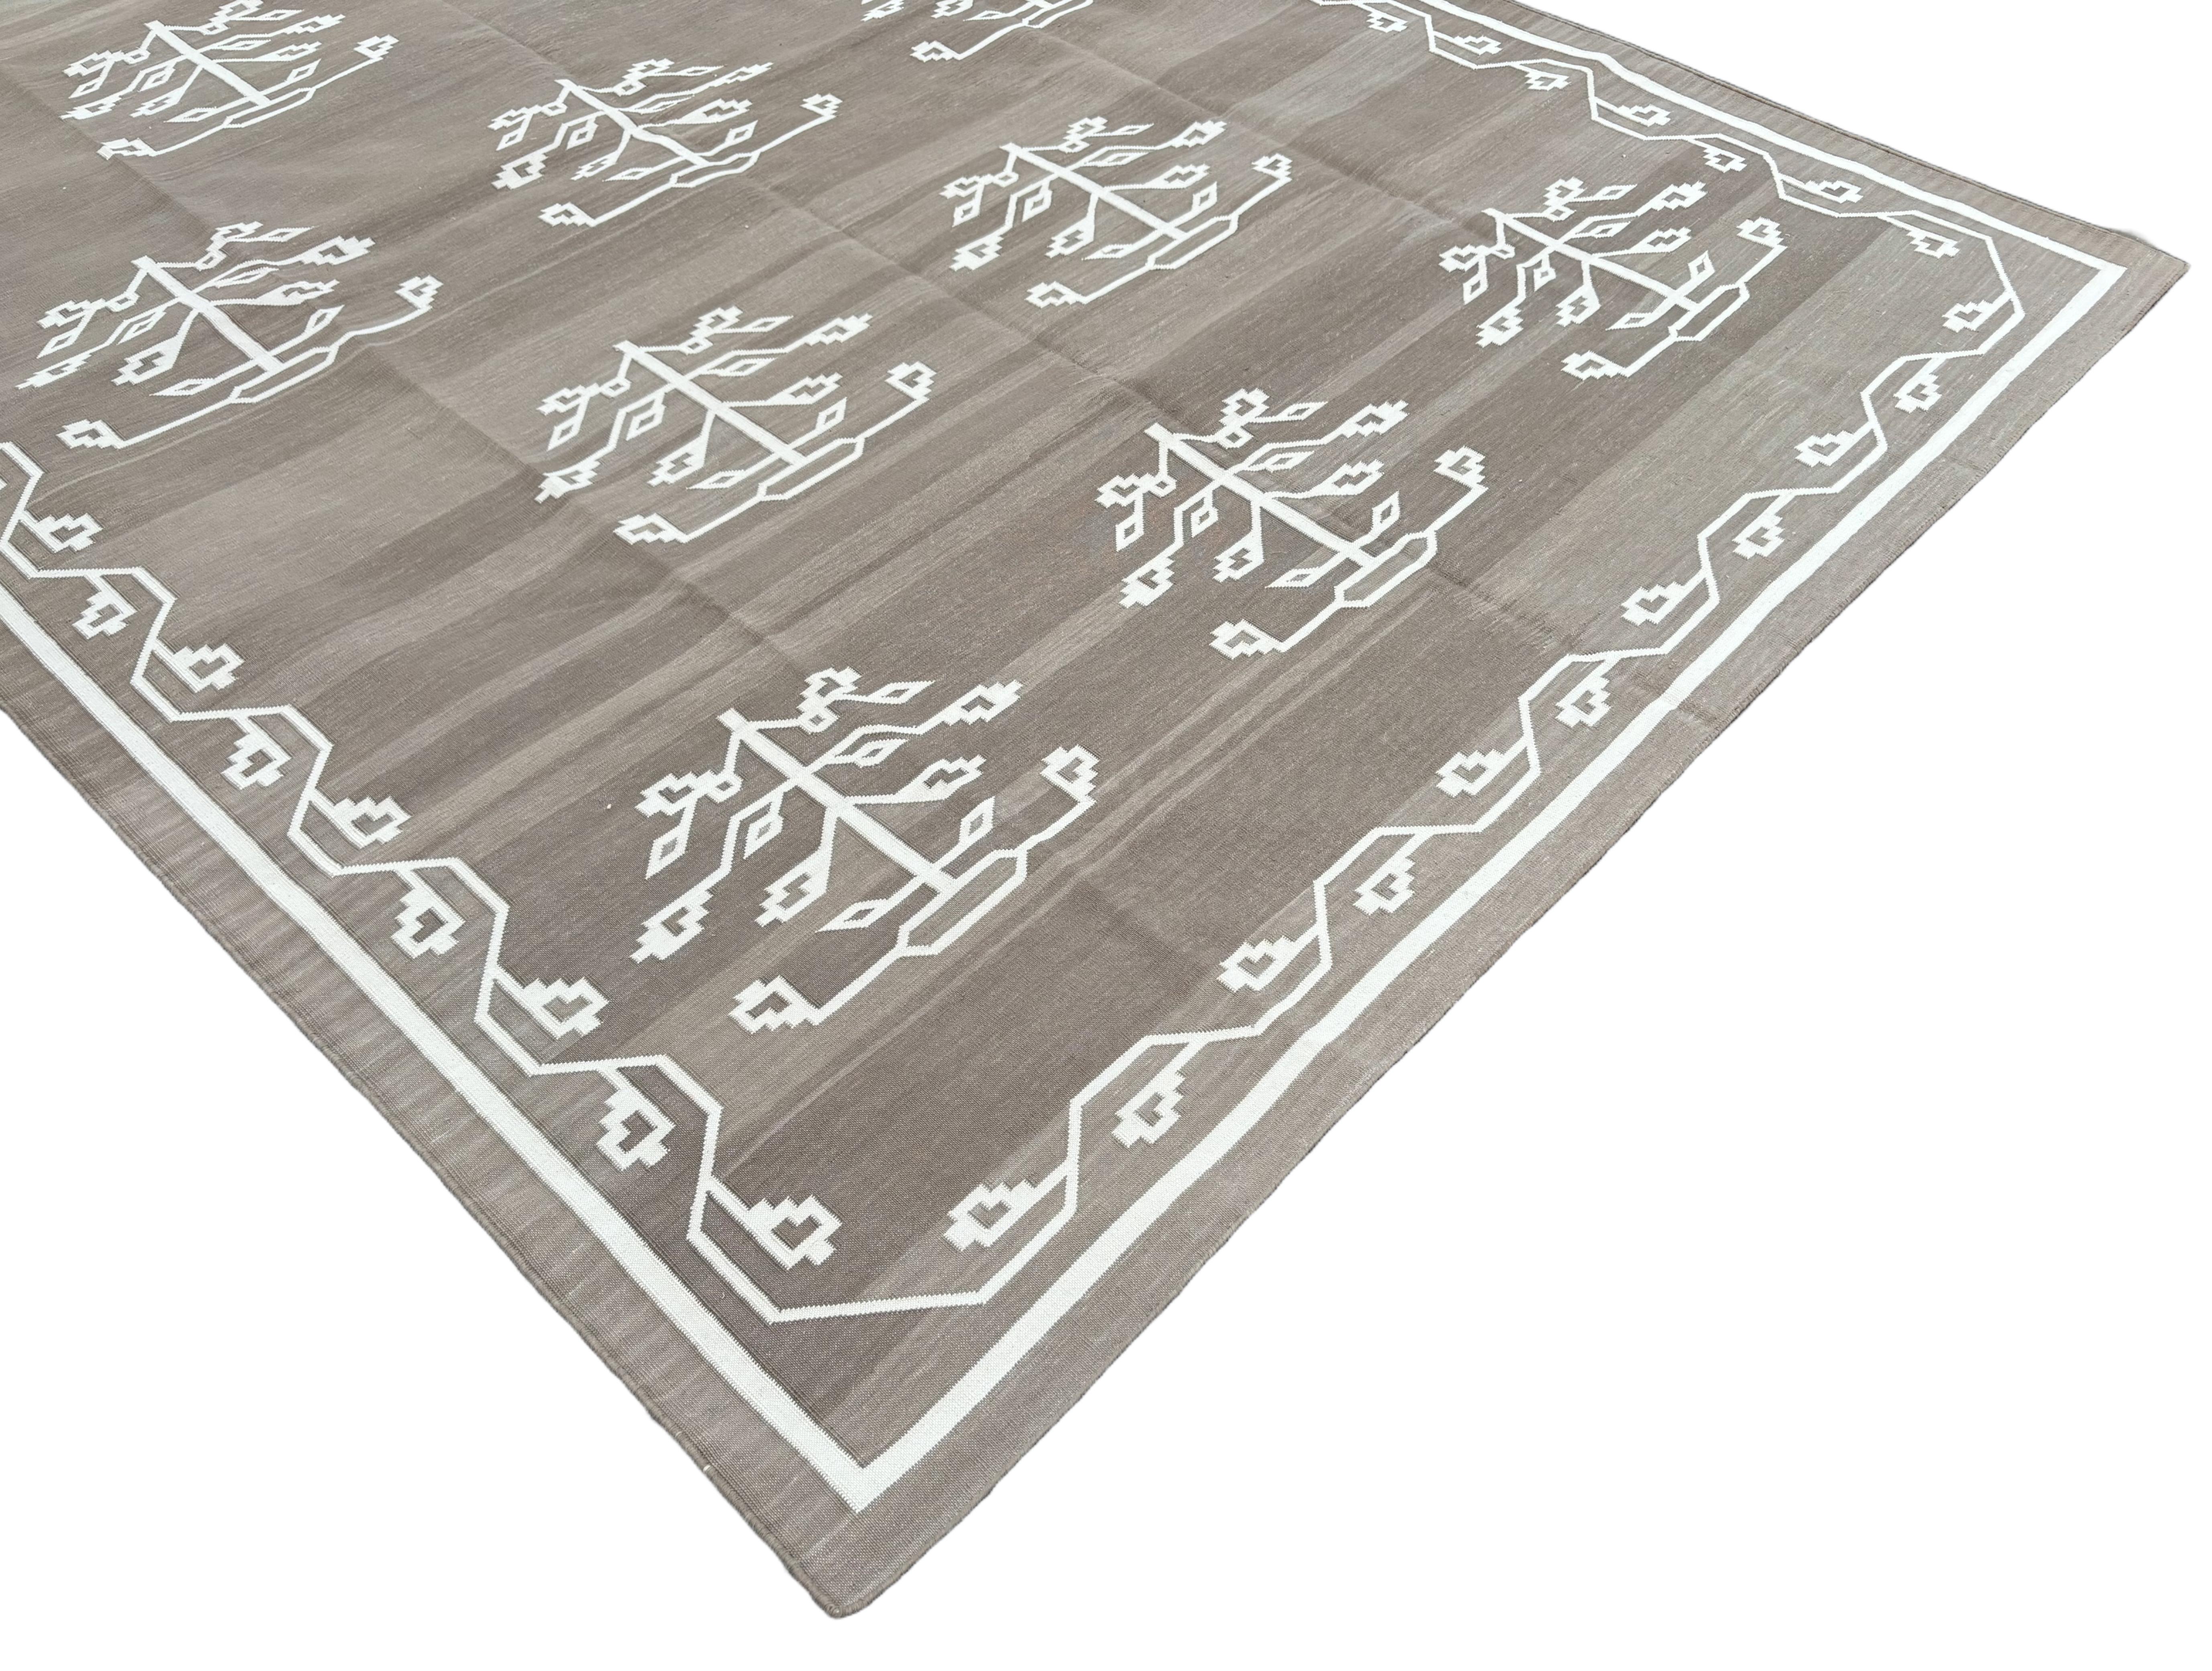 Hand-Woven Handmade Cotton Area Flat Weave Rug, 7x10 Beige And White Leaf Indian Dhurrie For Sale